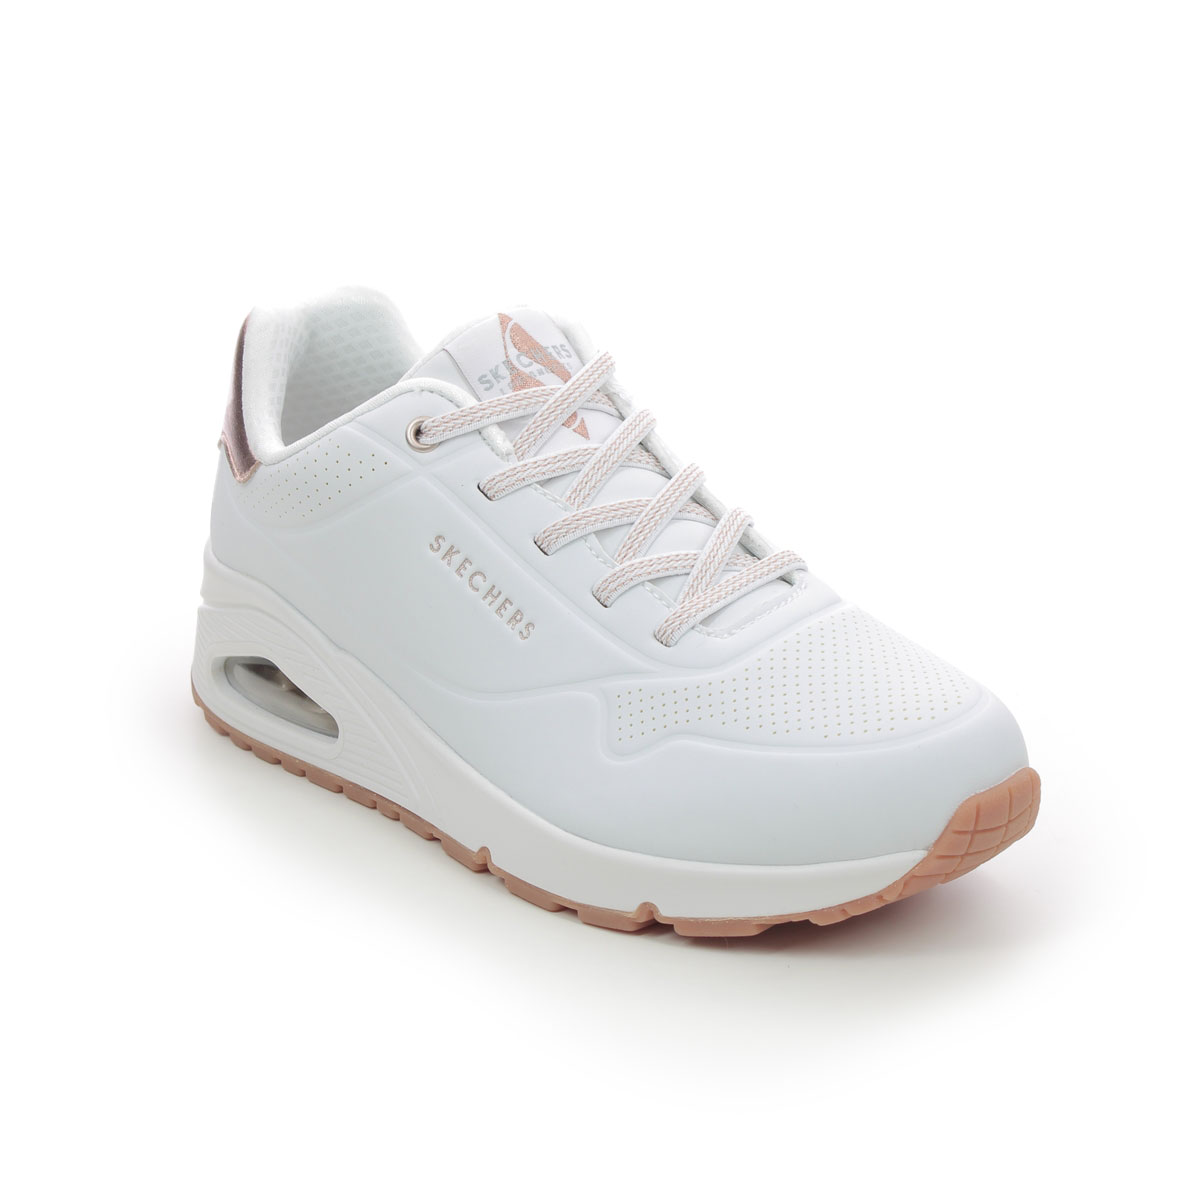 Skechers Uno WHT White Womens trainers 155196 in a Plain Man-made in Size 2.5